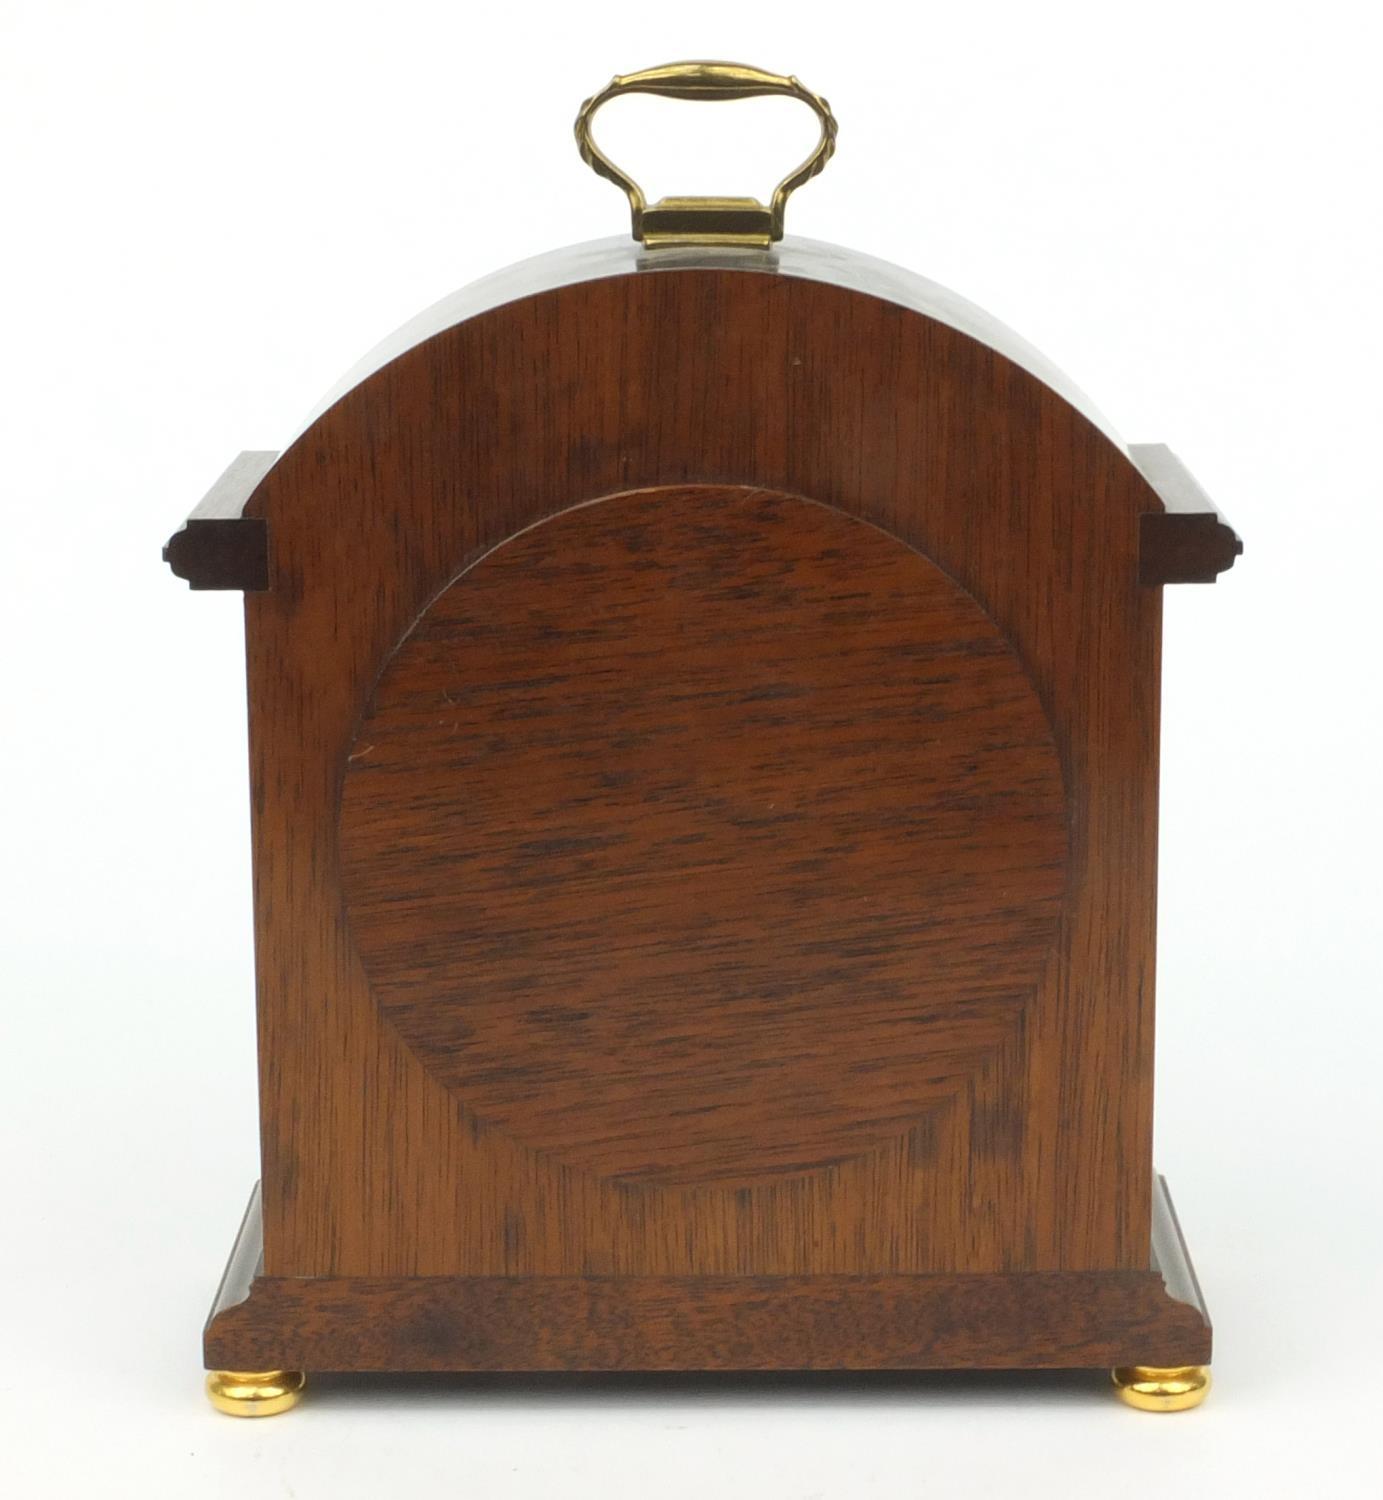 Inlaid mahogany Comitti of London mantel clock, with brass handle, 25cm high including the handle - Image 3 of 7